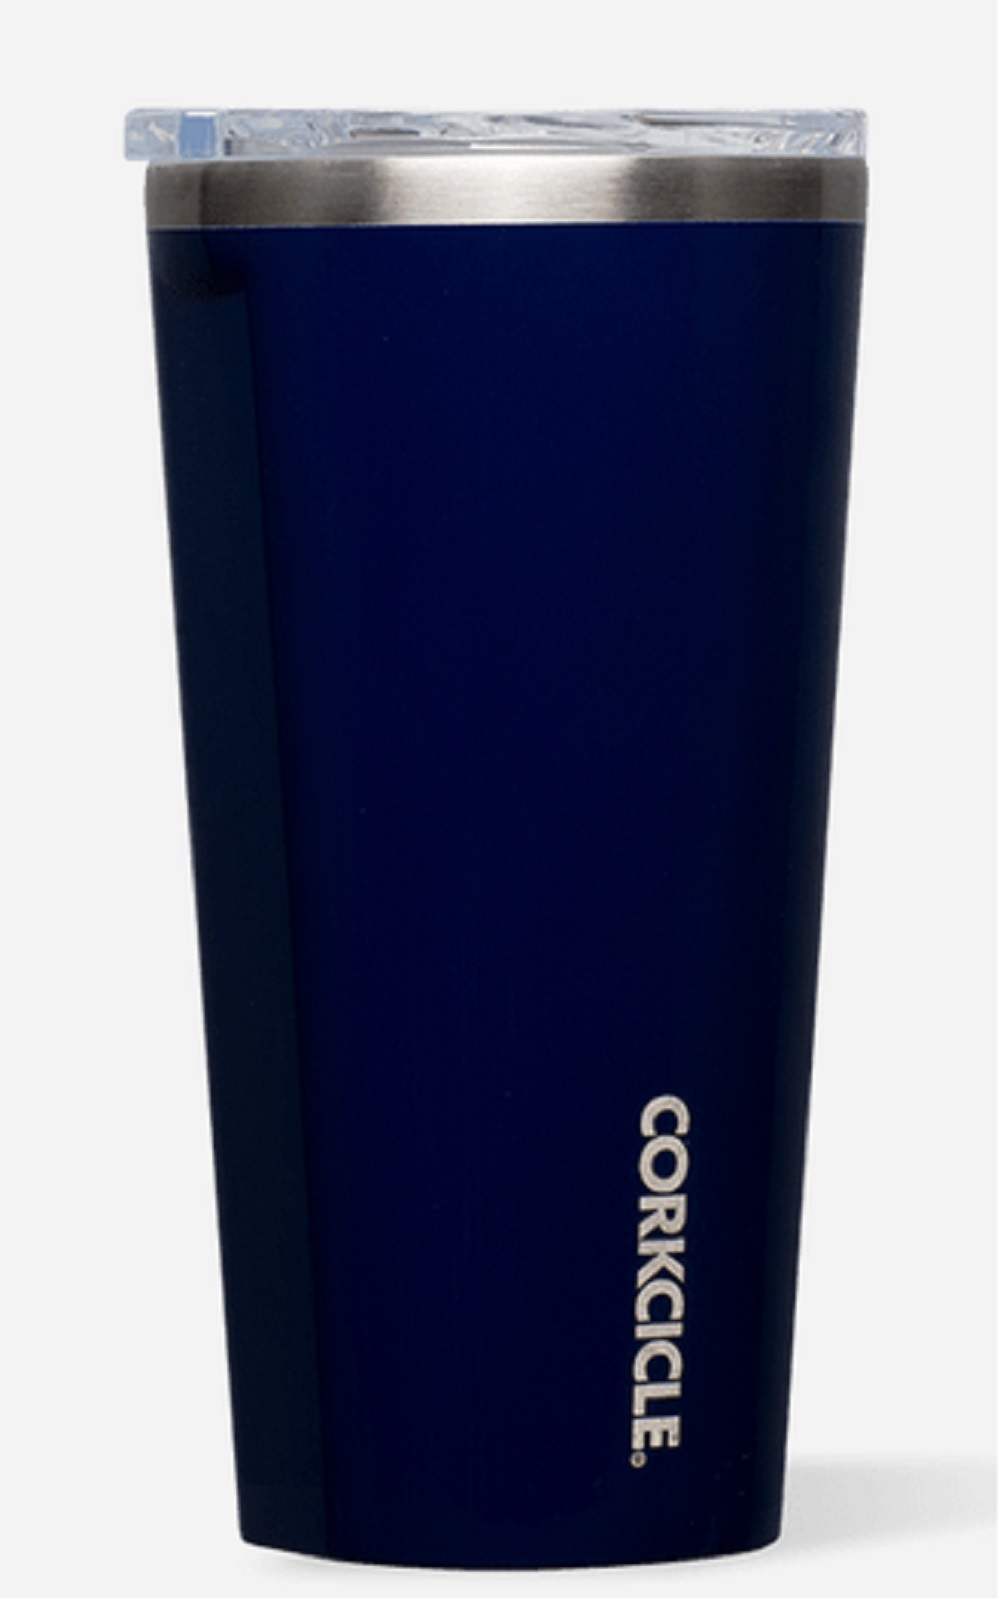 Corkcicle Classic 16oz. Stainless Steel Tumbler in Midnight Navy Blue